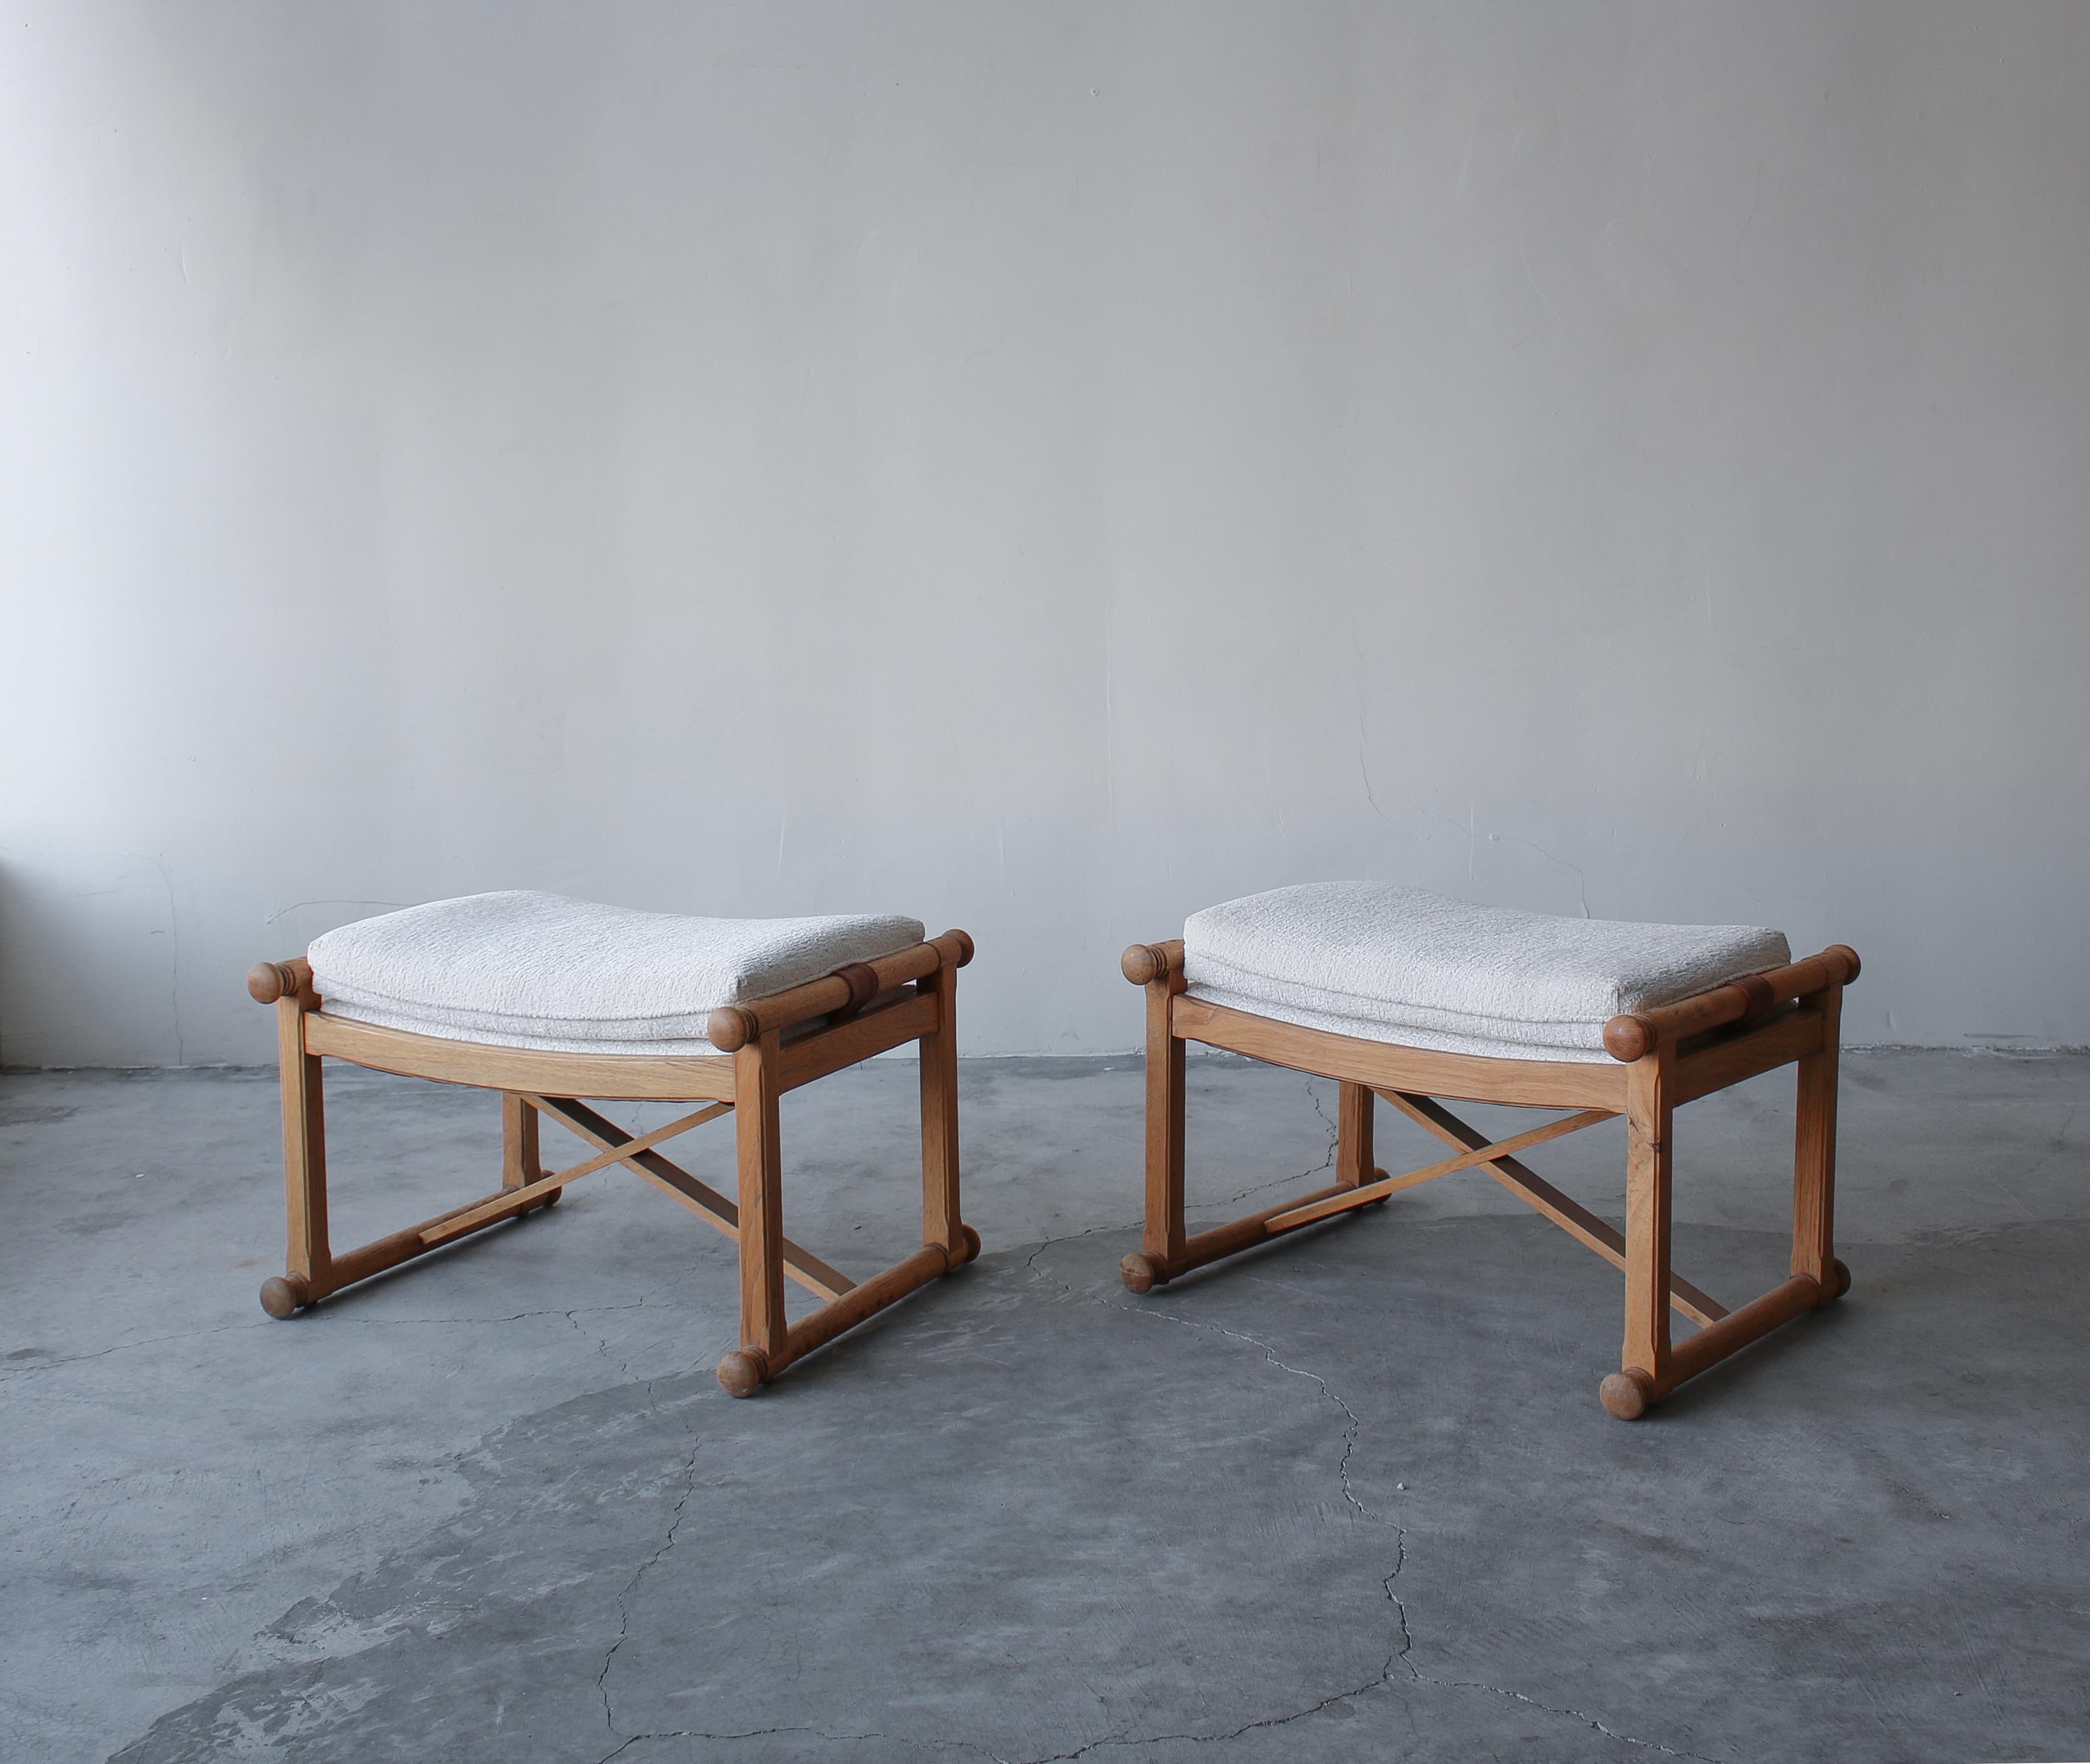 Just lovely pair of light oak stools with leather straps and bouclé style fabric. The stools feature an X-base style stretcher adding to their design details. This pair has a very warm organic yet in style feel to them. They are perfect for dressing